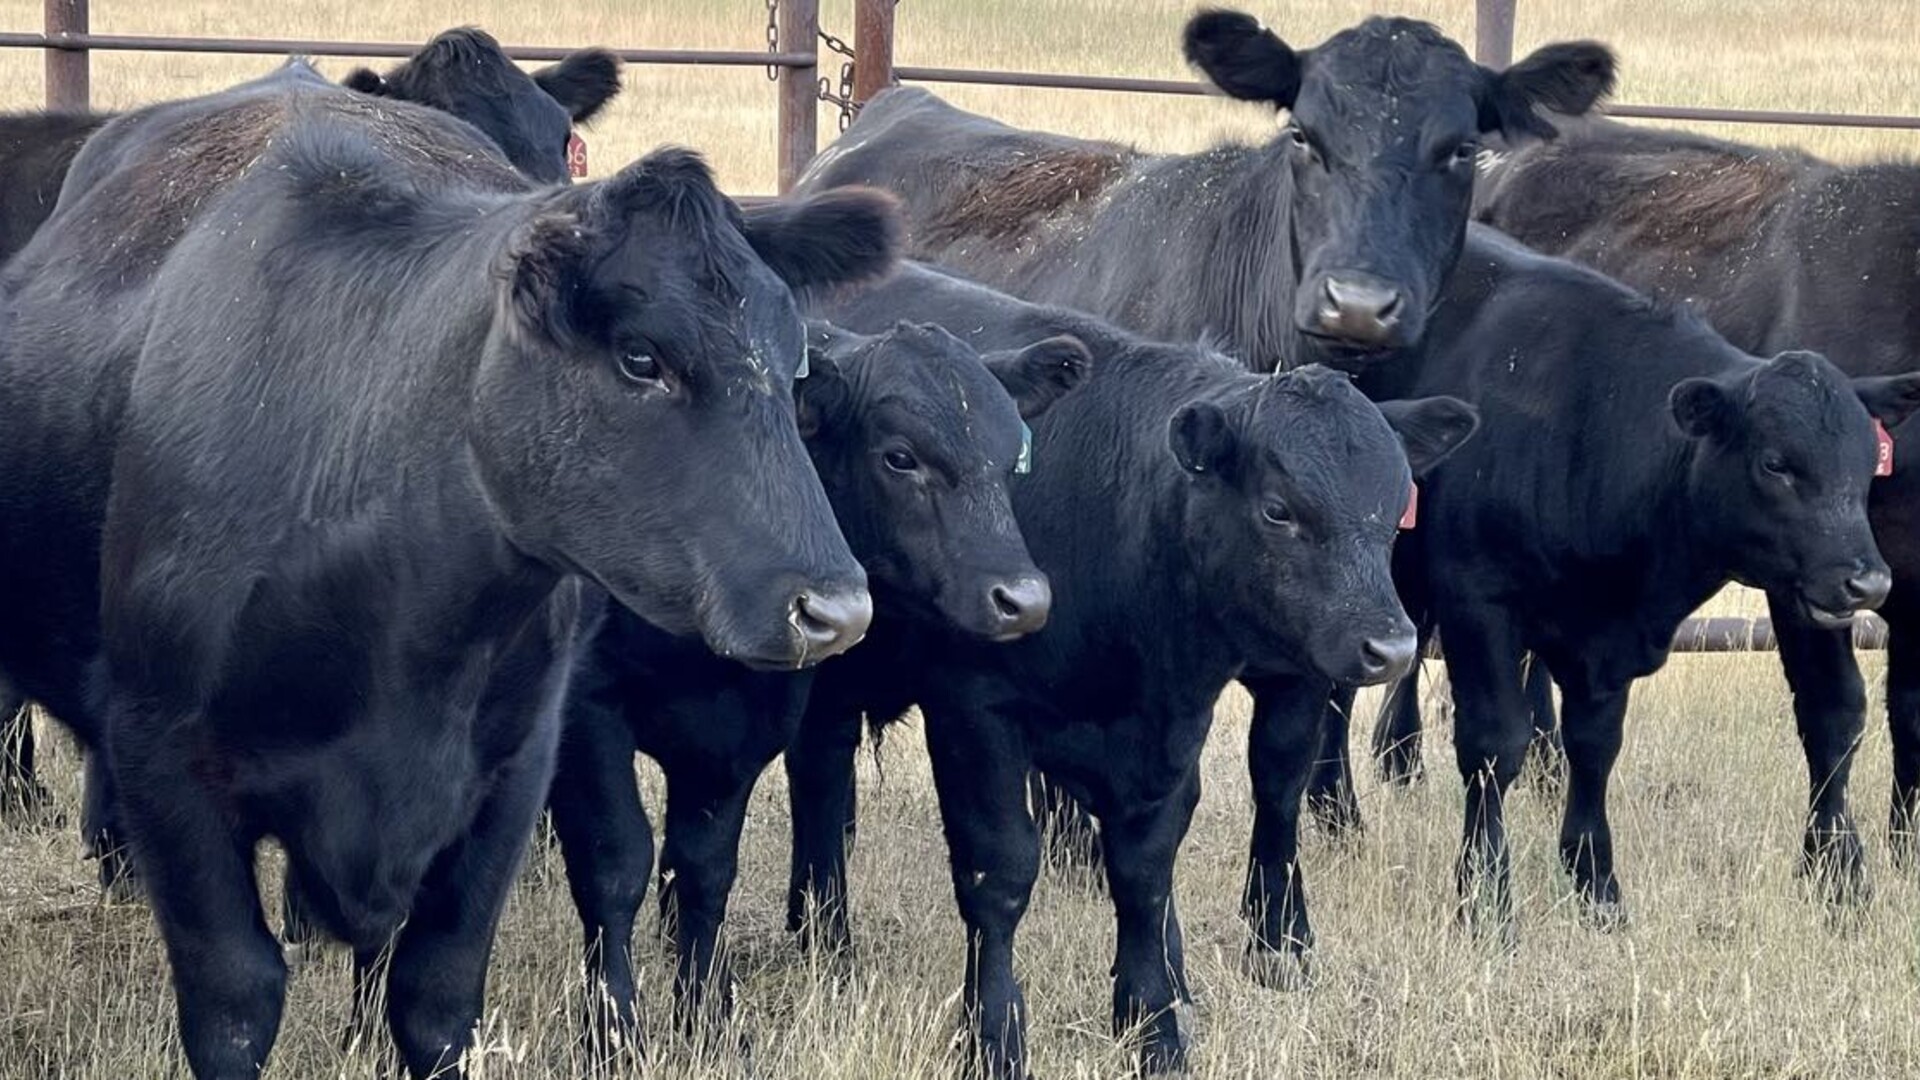 Cattle are King of U.S. Animal Receipts